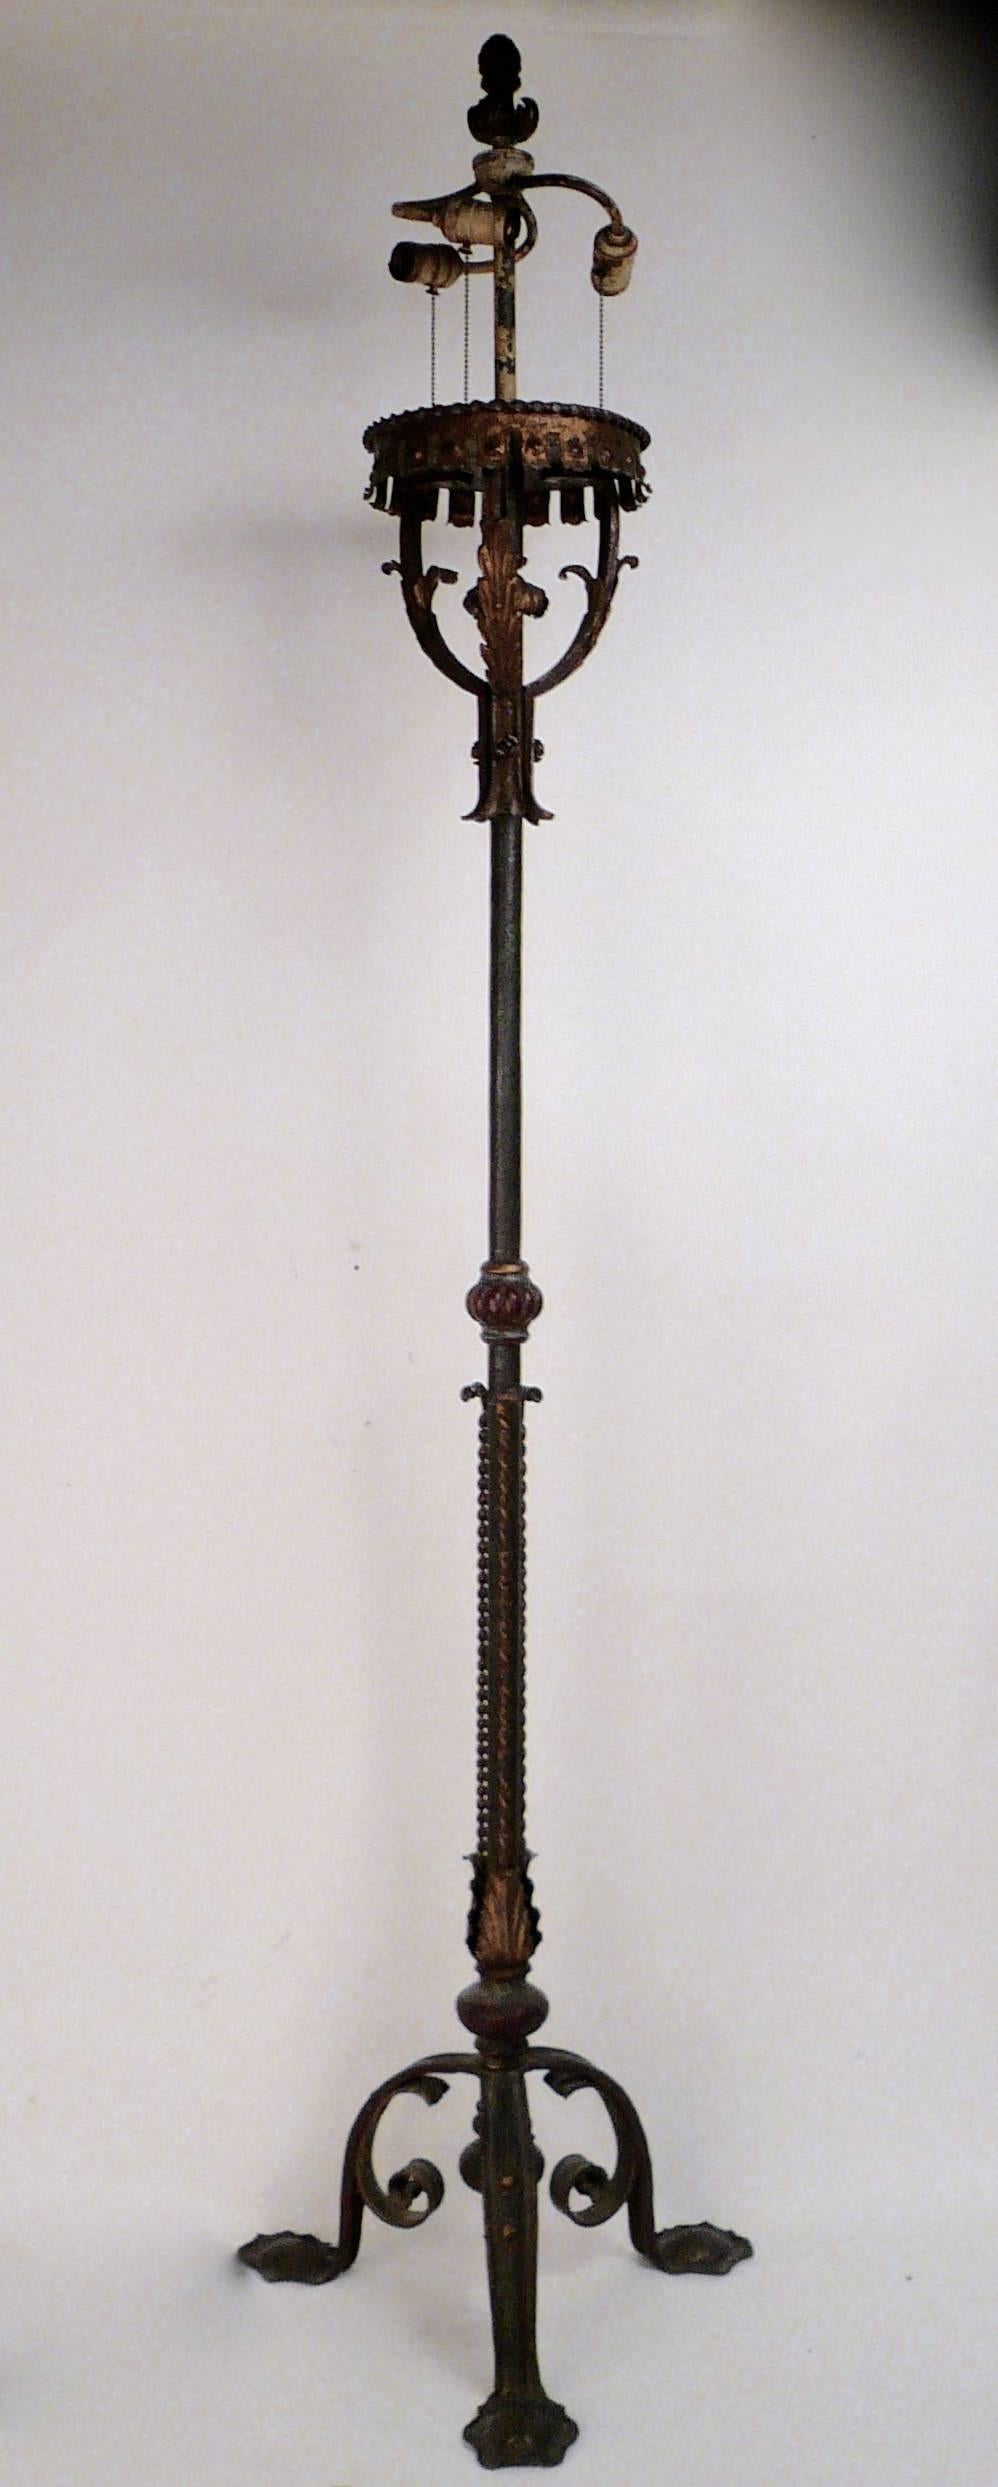 This impressive polychromed wrought iron torchere is handmade of heavy gauge metal. It features its original three light cluster and finial.